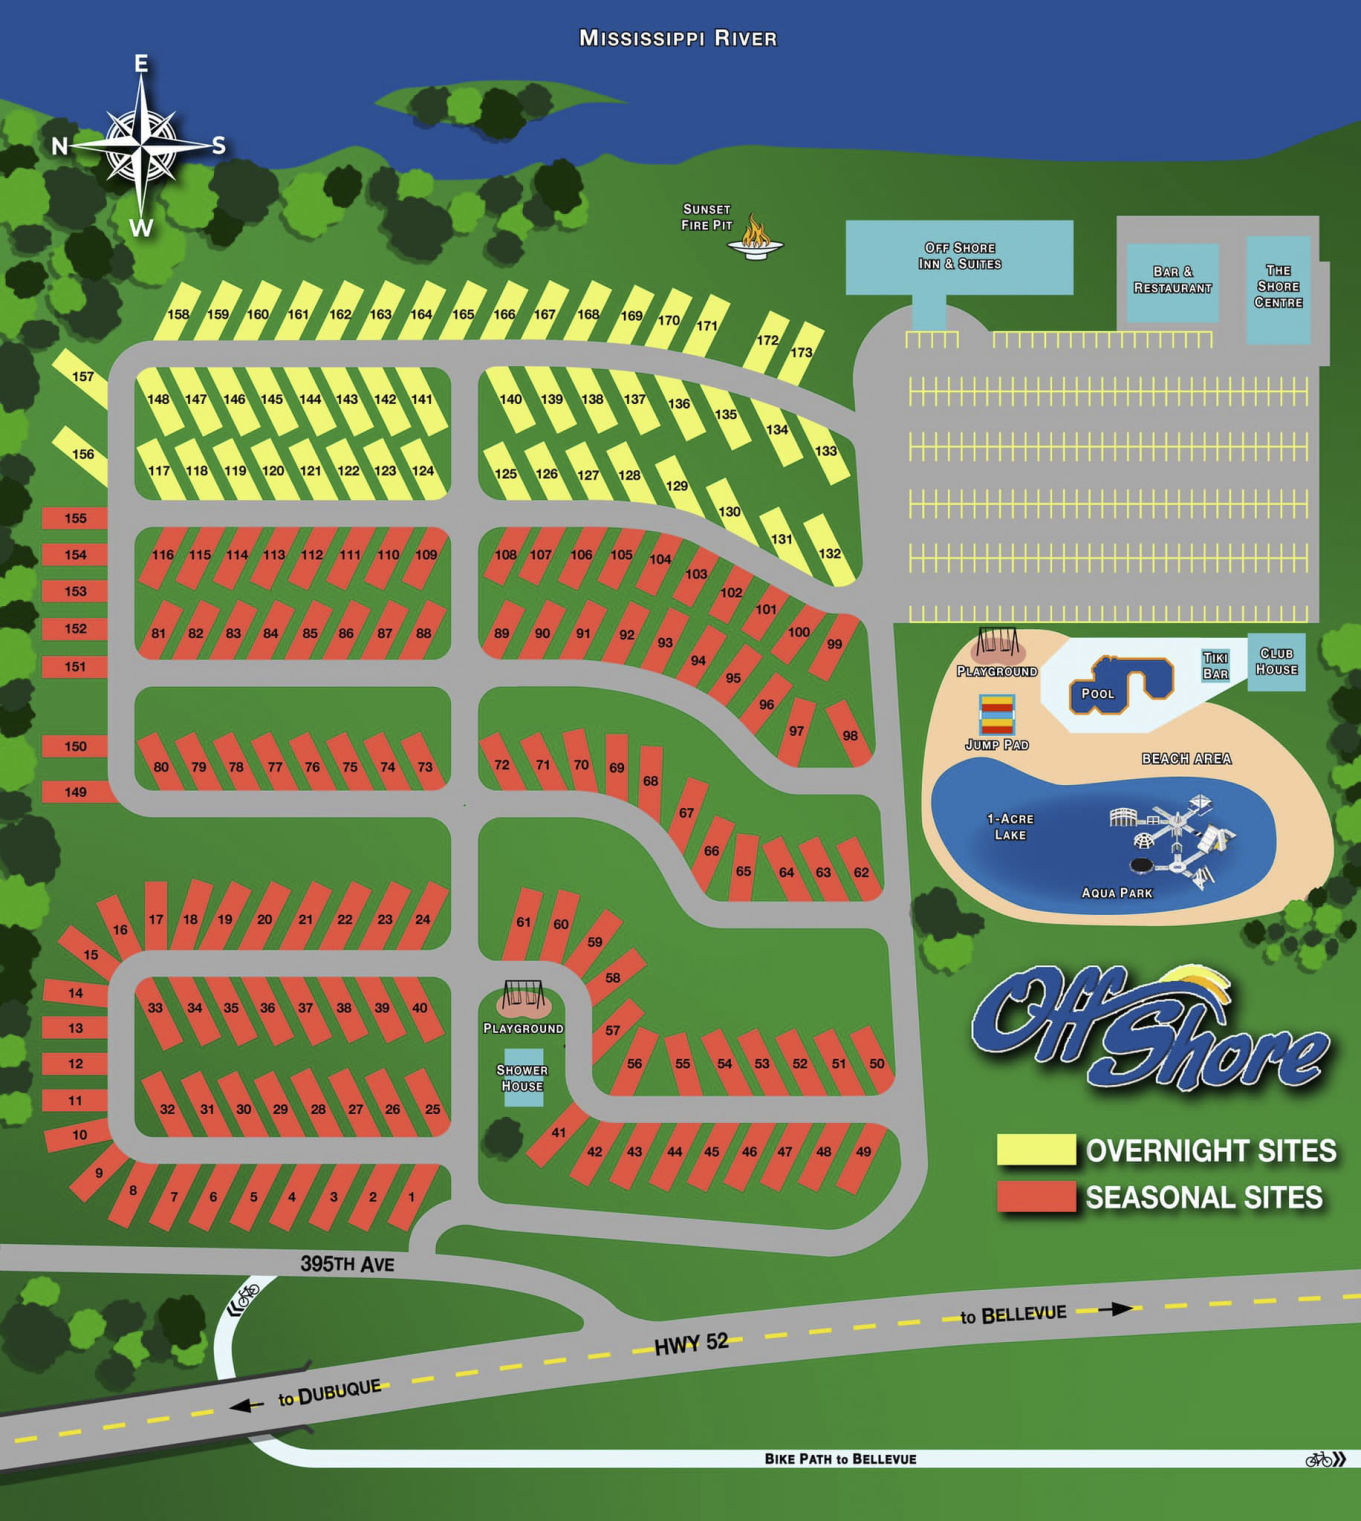 This image shows plans for the new Off Shore Resort in Bellevue, Iowa. PHOTO CREDIT: Contributed